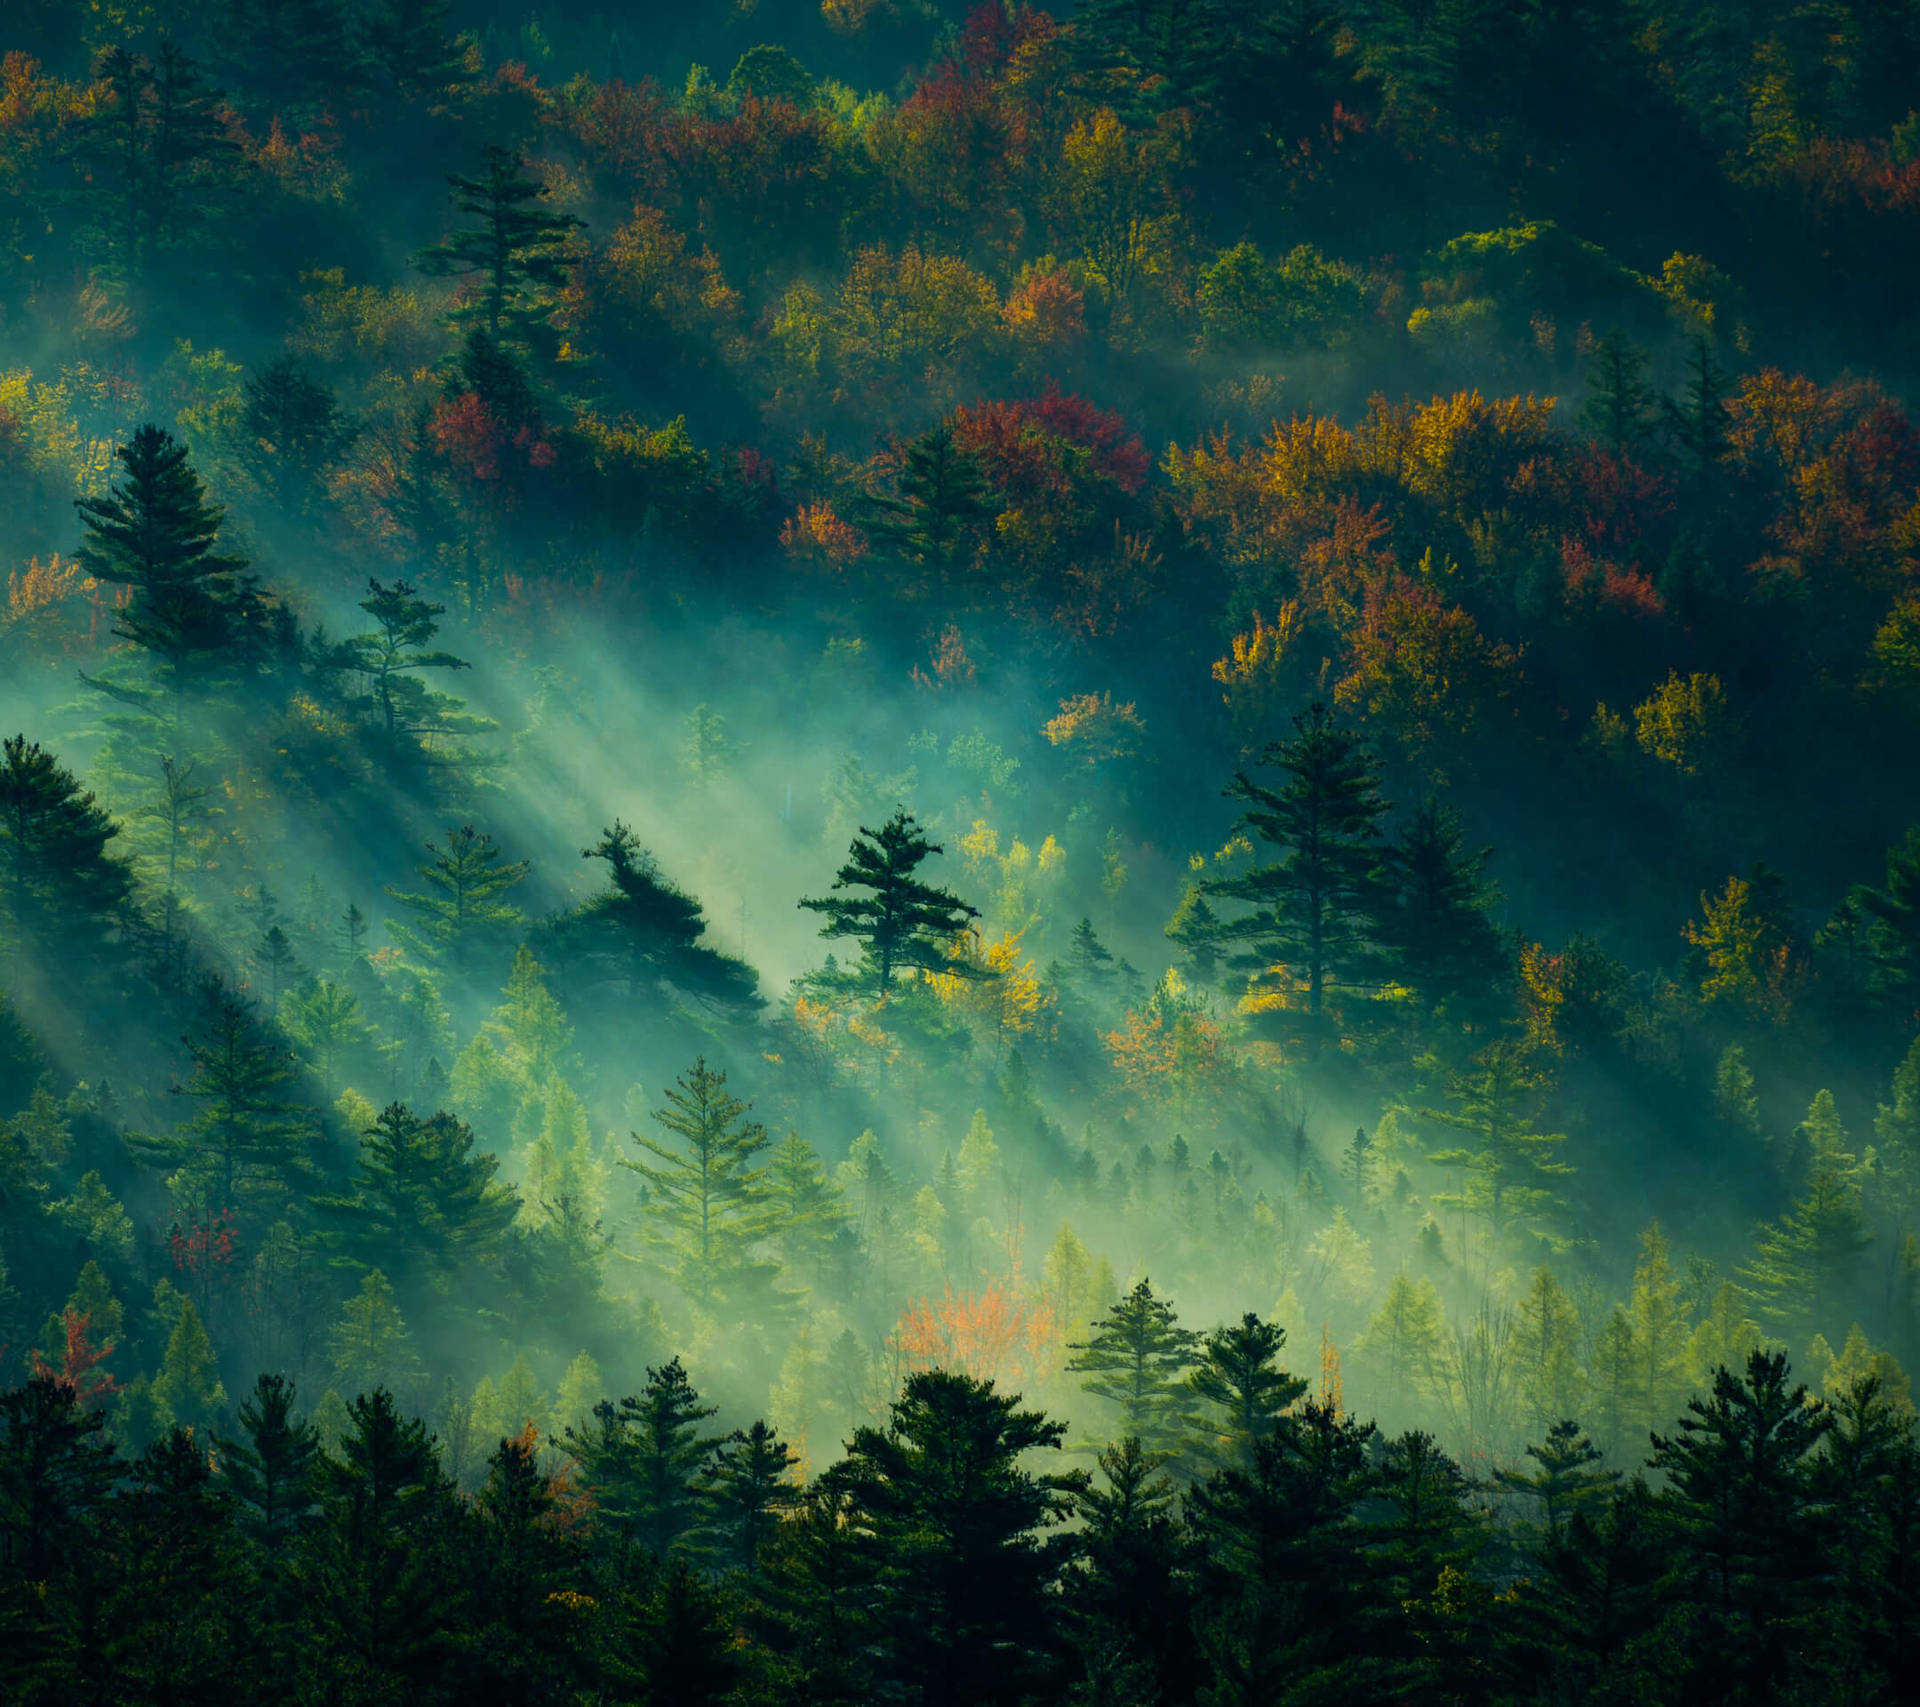 Misty Green Forest Image